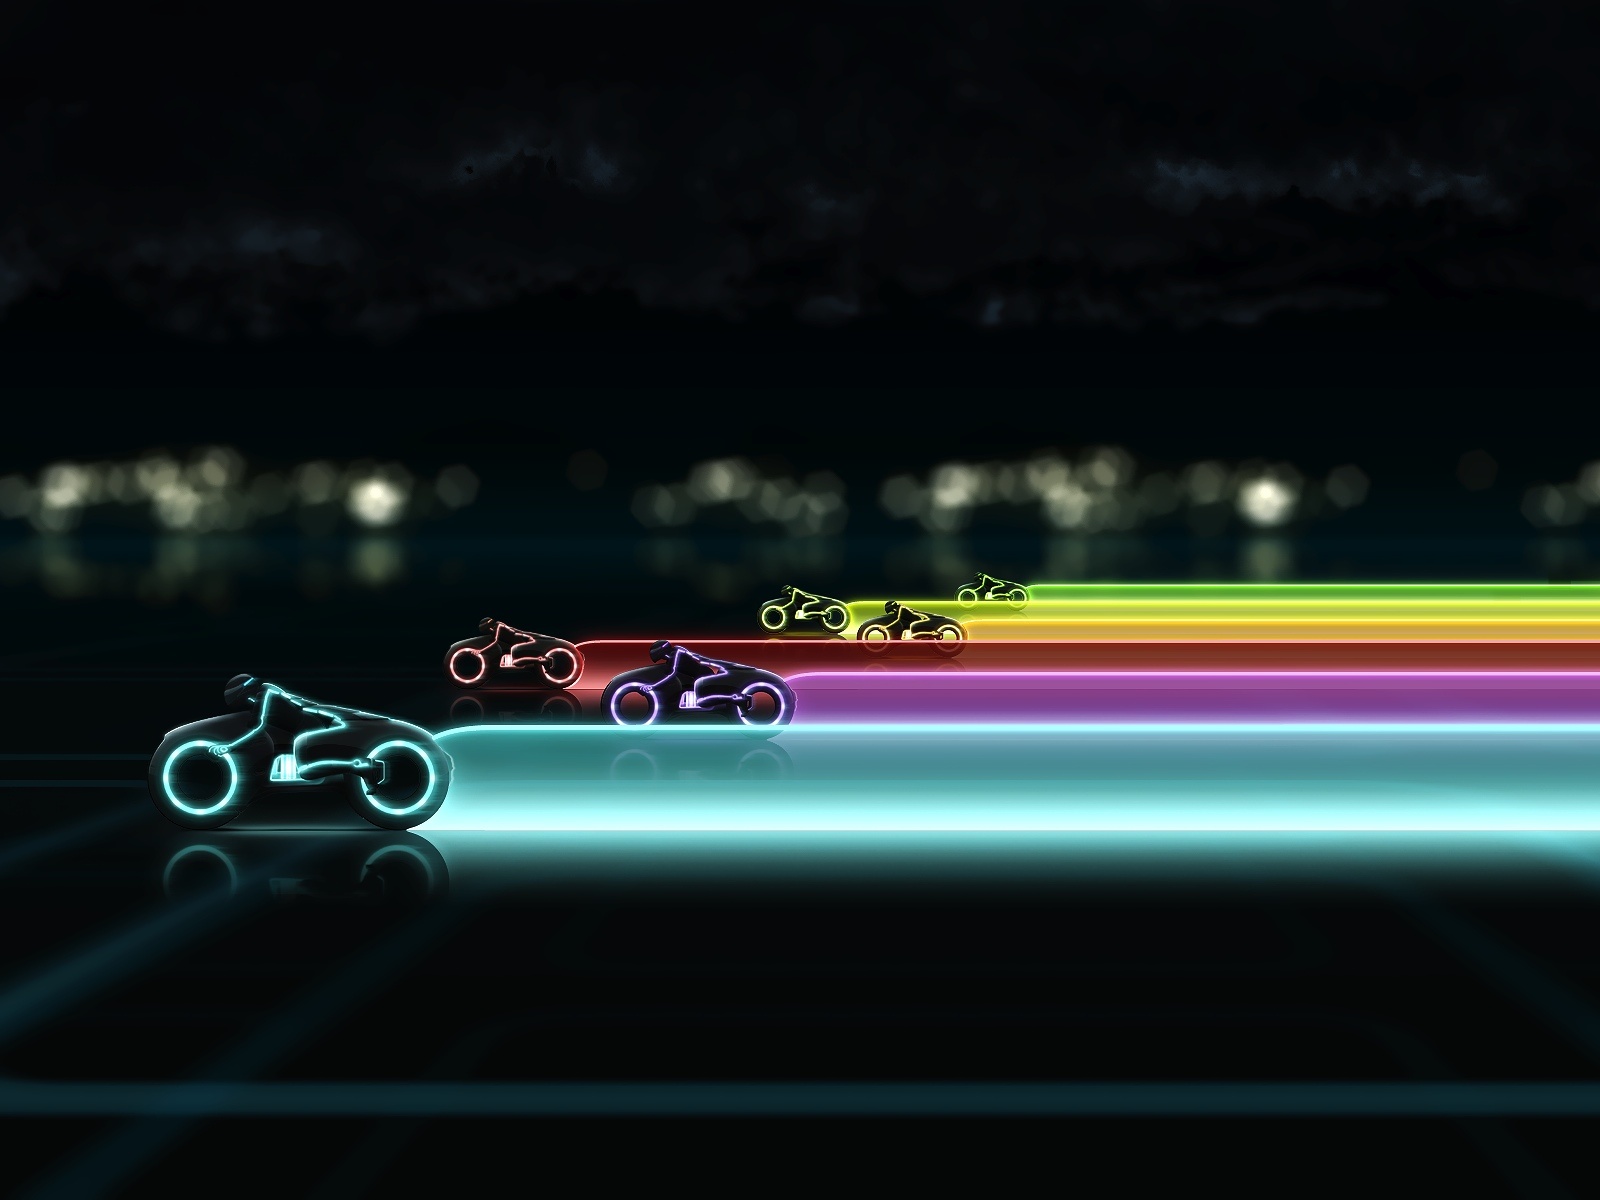 Tron Legacy Lightcycle Race Wallpapers in jpg format for free 